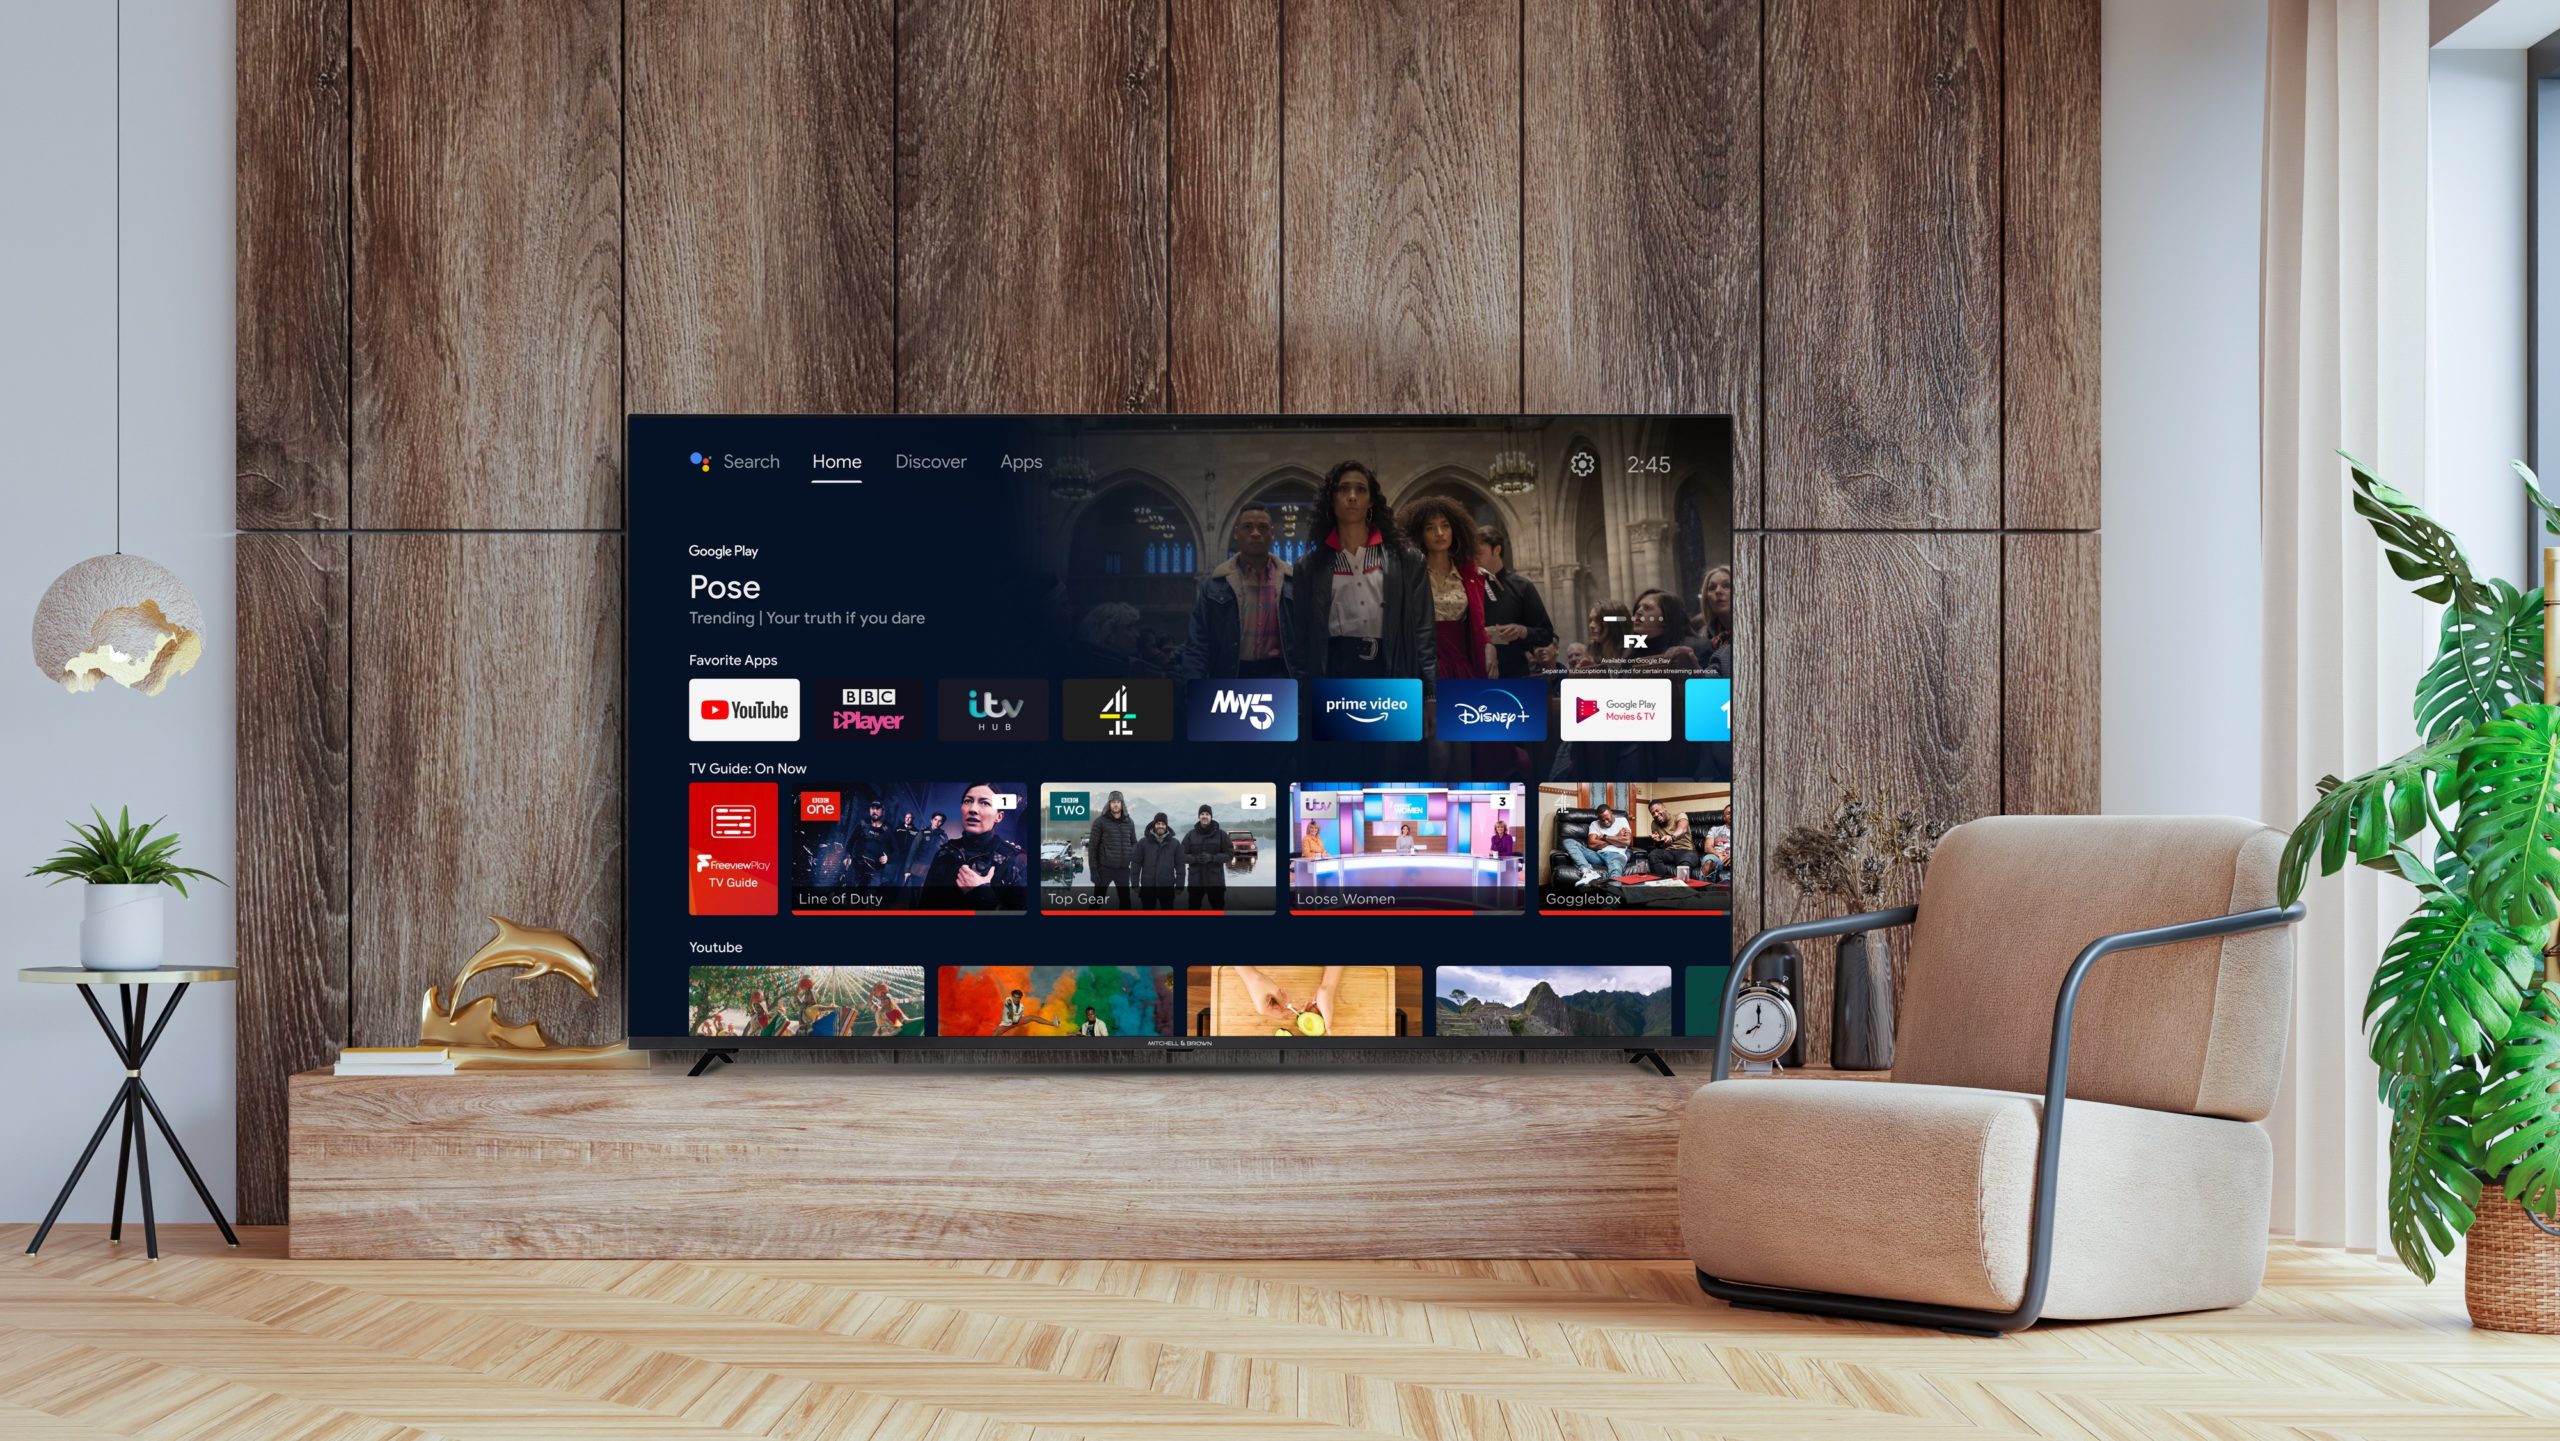 british-tv-brand-mitchell-&-brown-unveils-65-inch-4k-smart-tv-with-android-tv-os